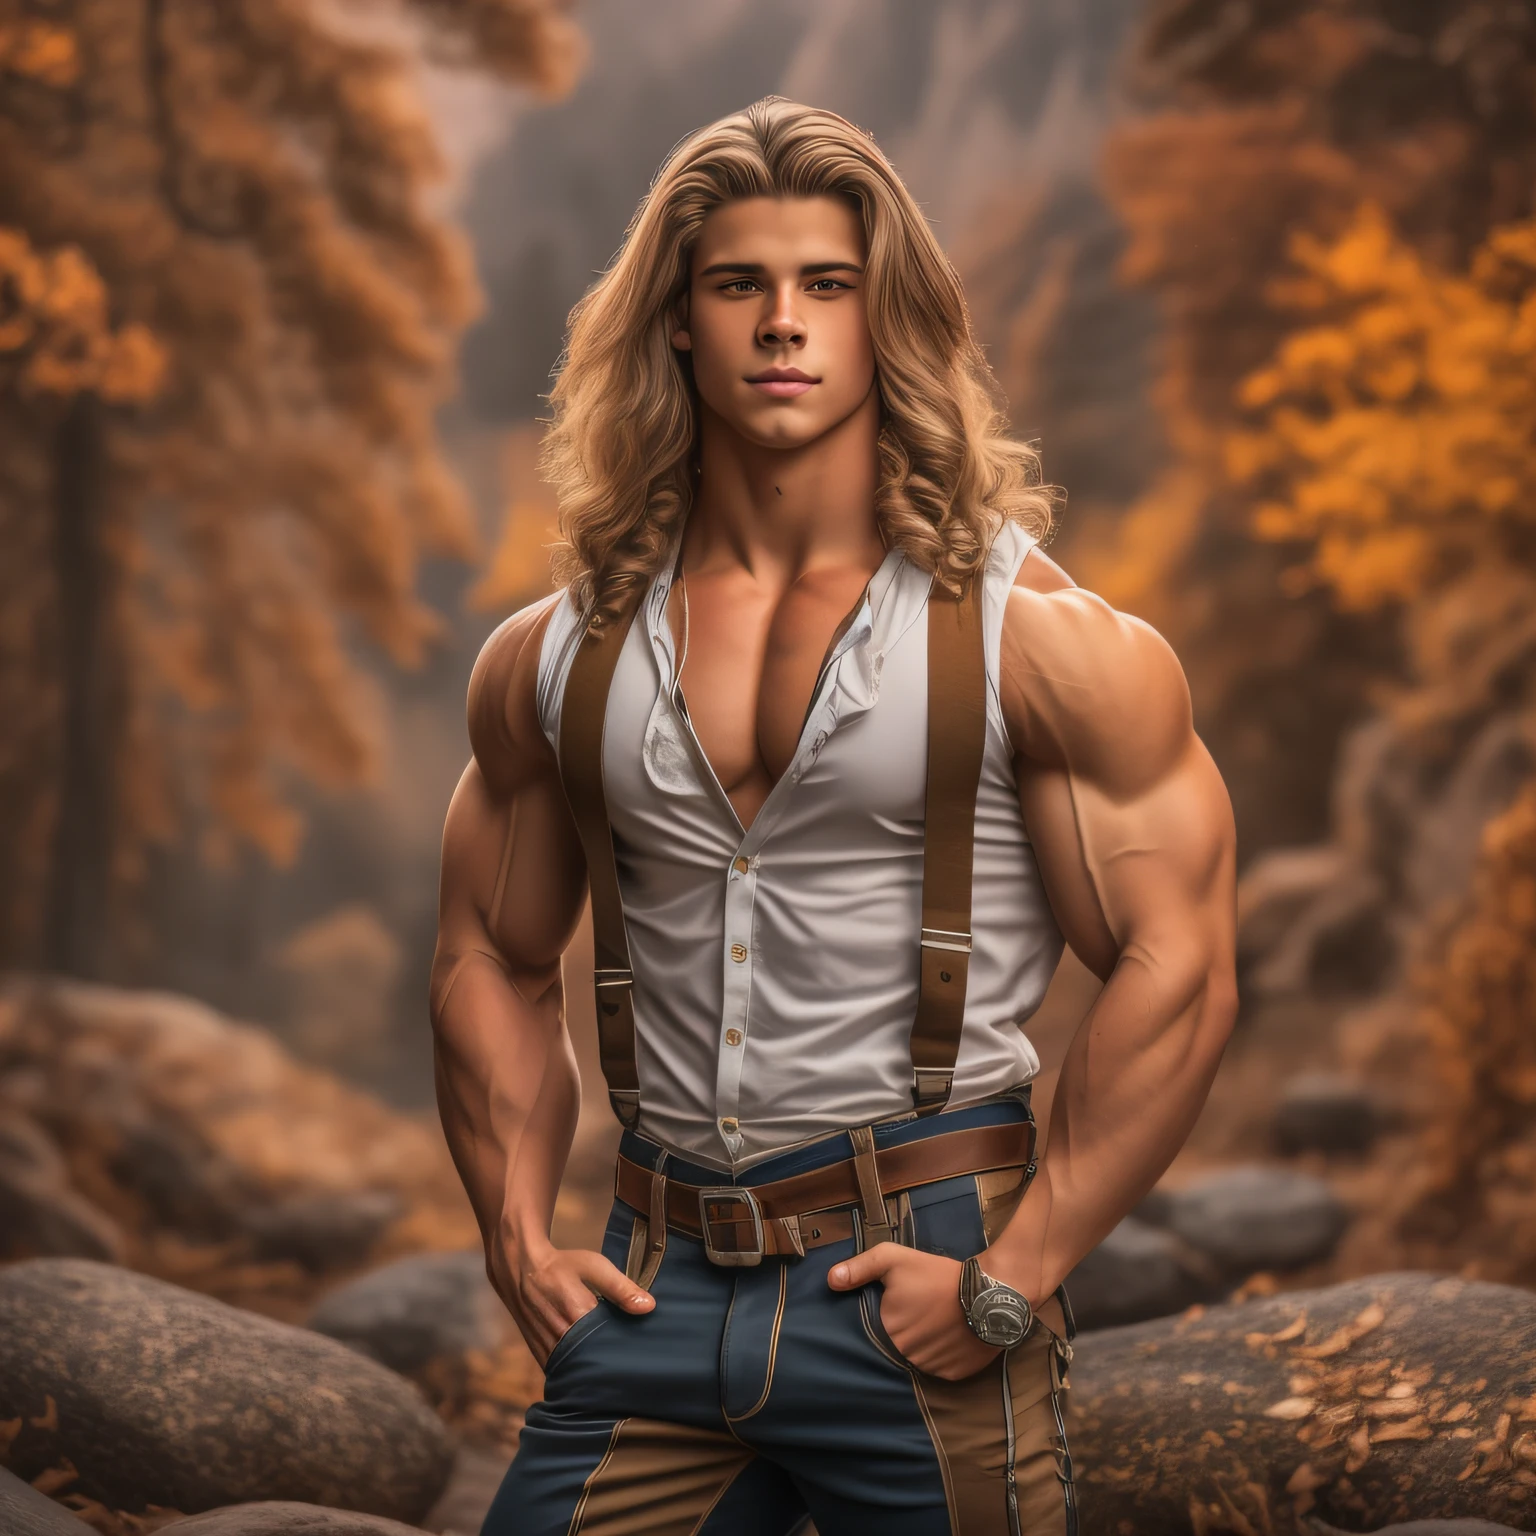 An 18-year-old boy bodybuilder, embodying the perfect fusion of Joey Lawrence and Cody Calafiore with long hair, exuding an aura of strength and confidence. Enhanced with HDR technology, this image depicts a true masterpiece, 4K resolution, Swabian lederhosen, fairytale fantasy vibe